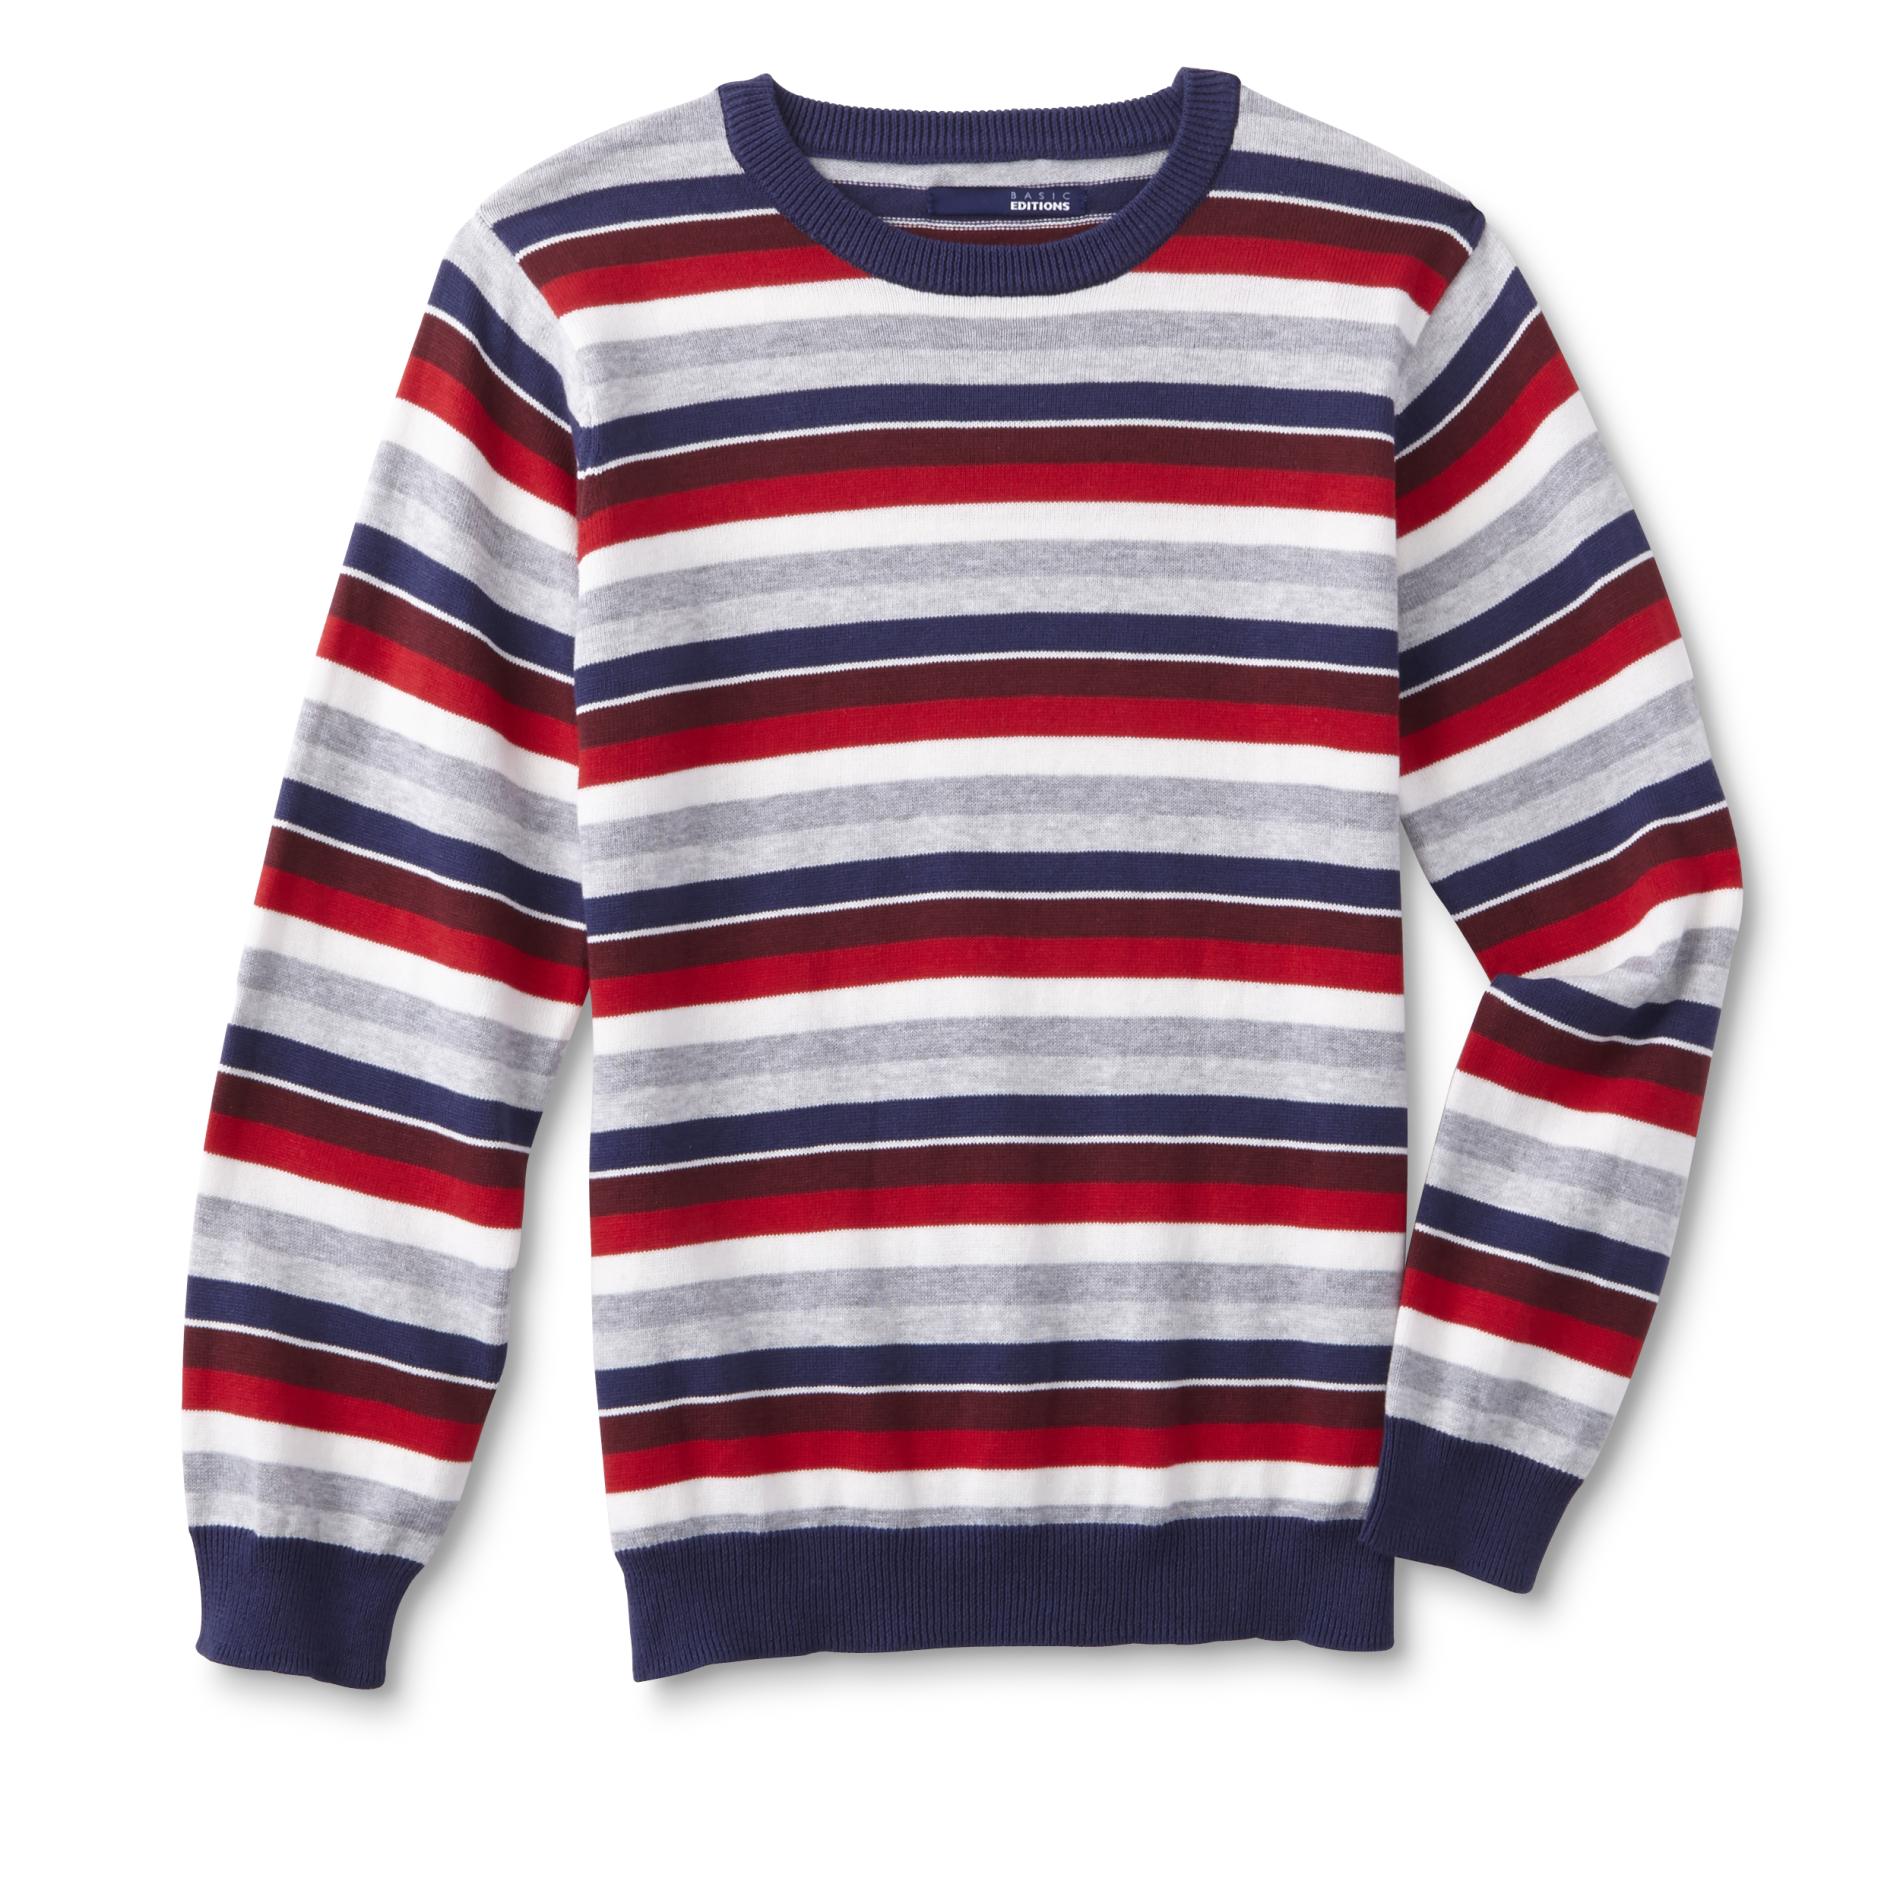 Basic Editions Boy's Sweater - Striped